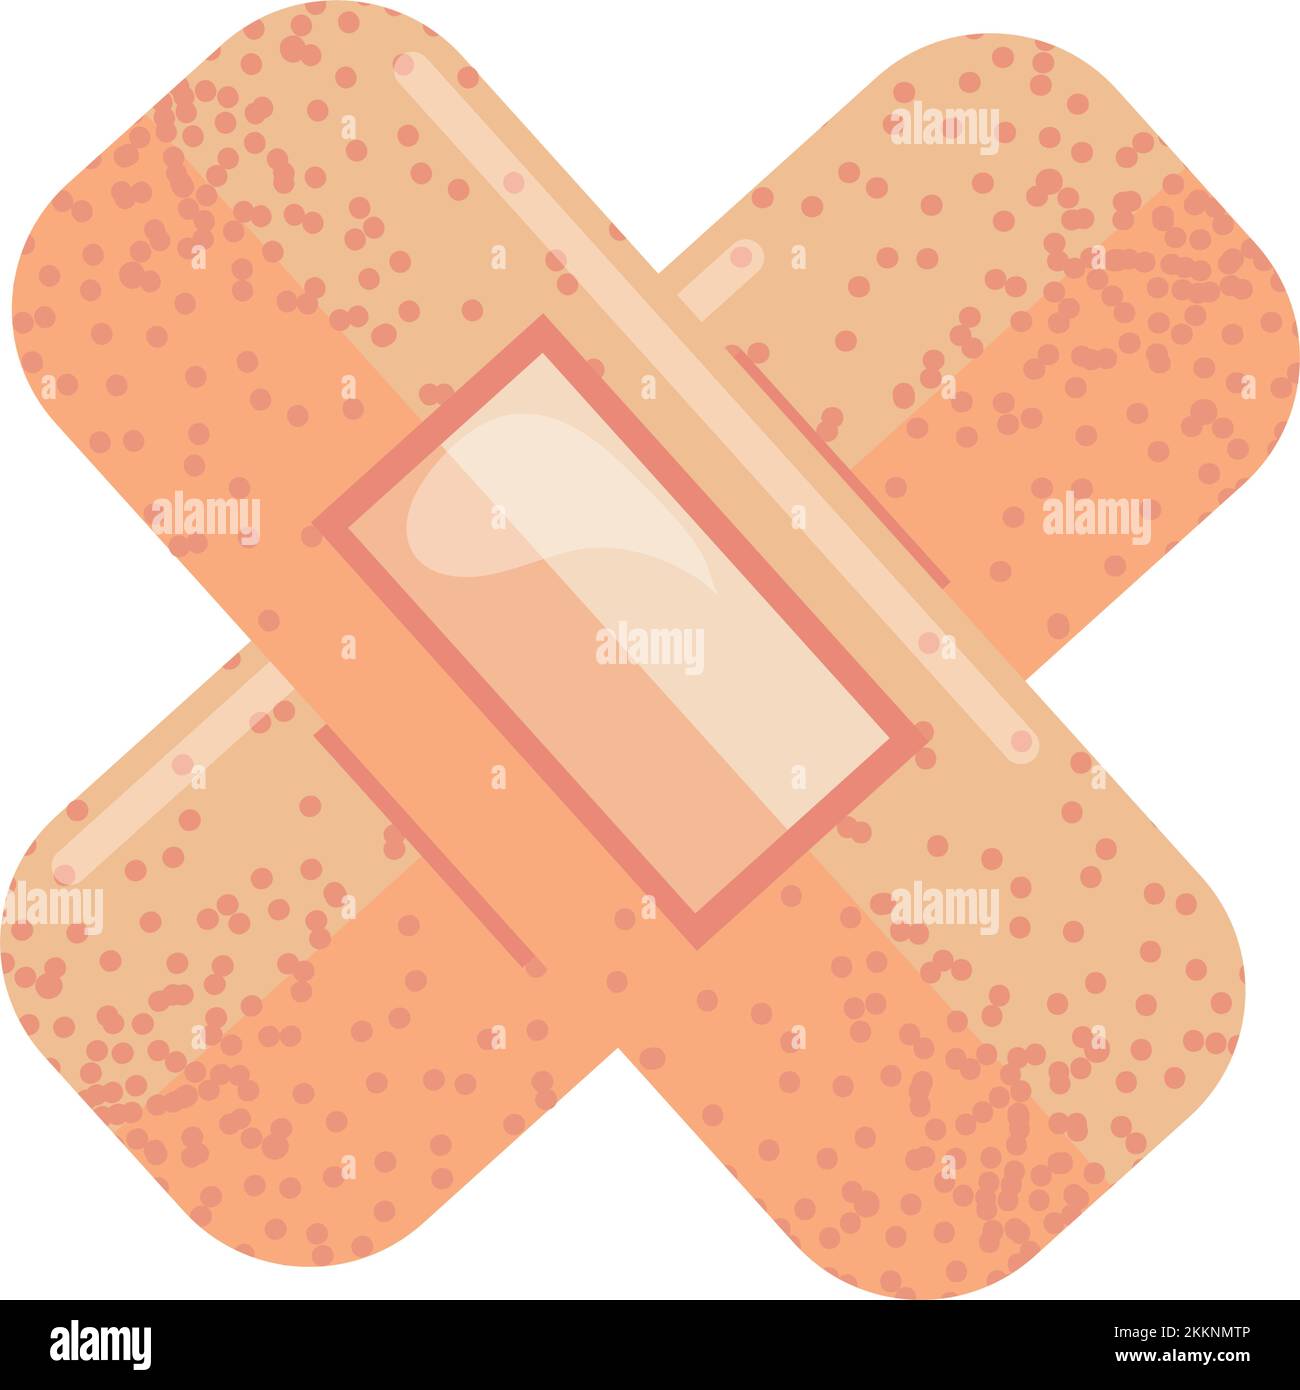 bands aid design Stock Vector